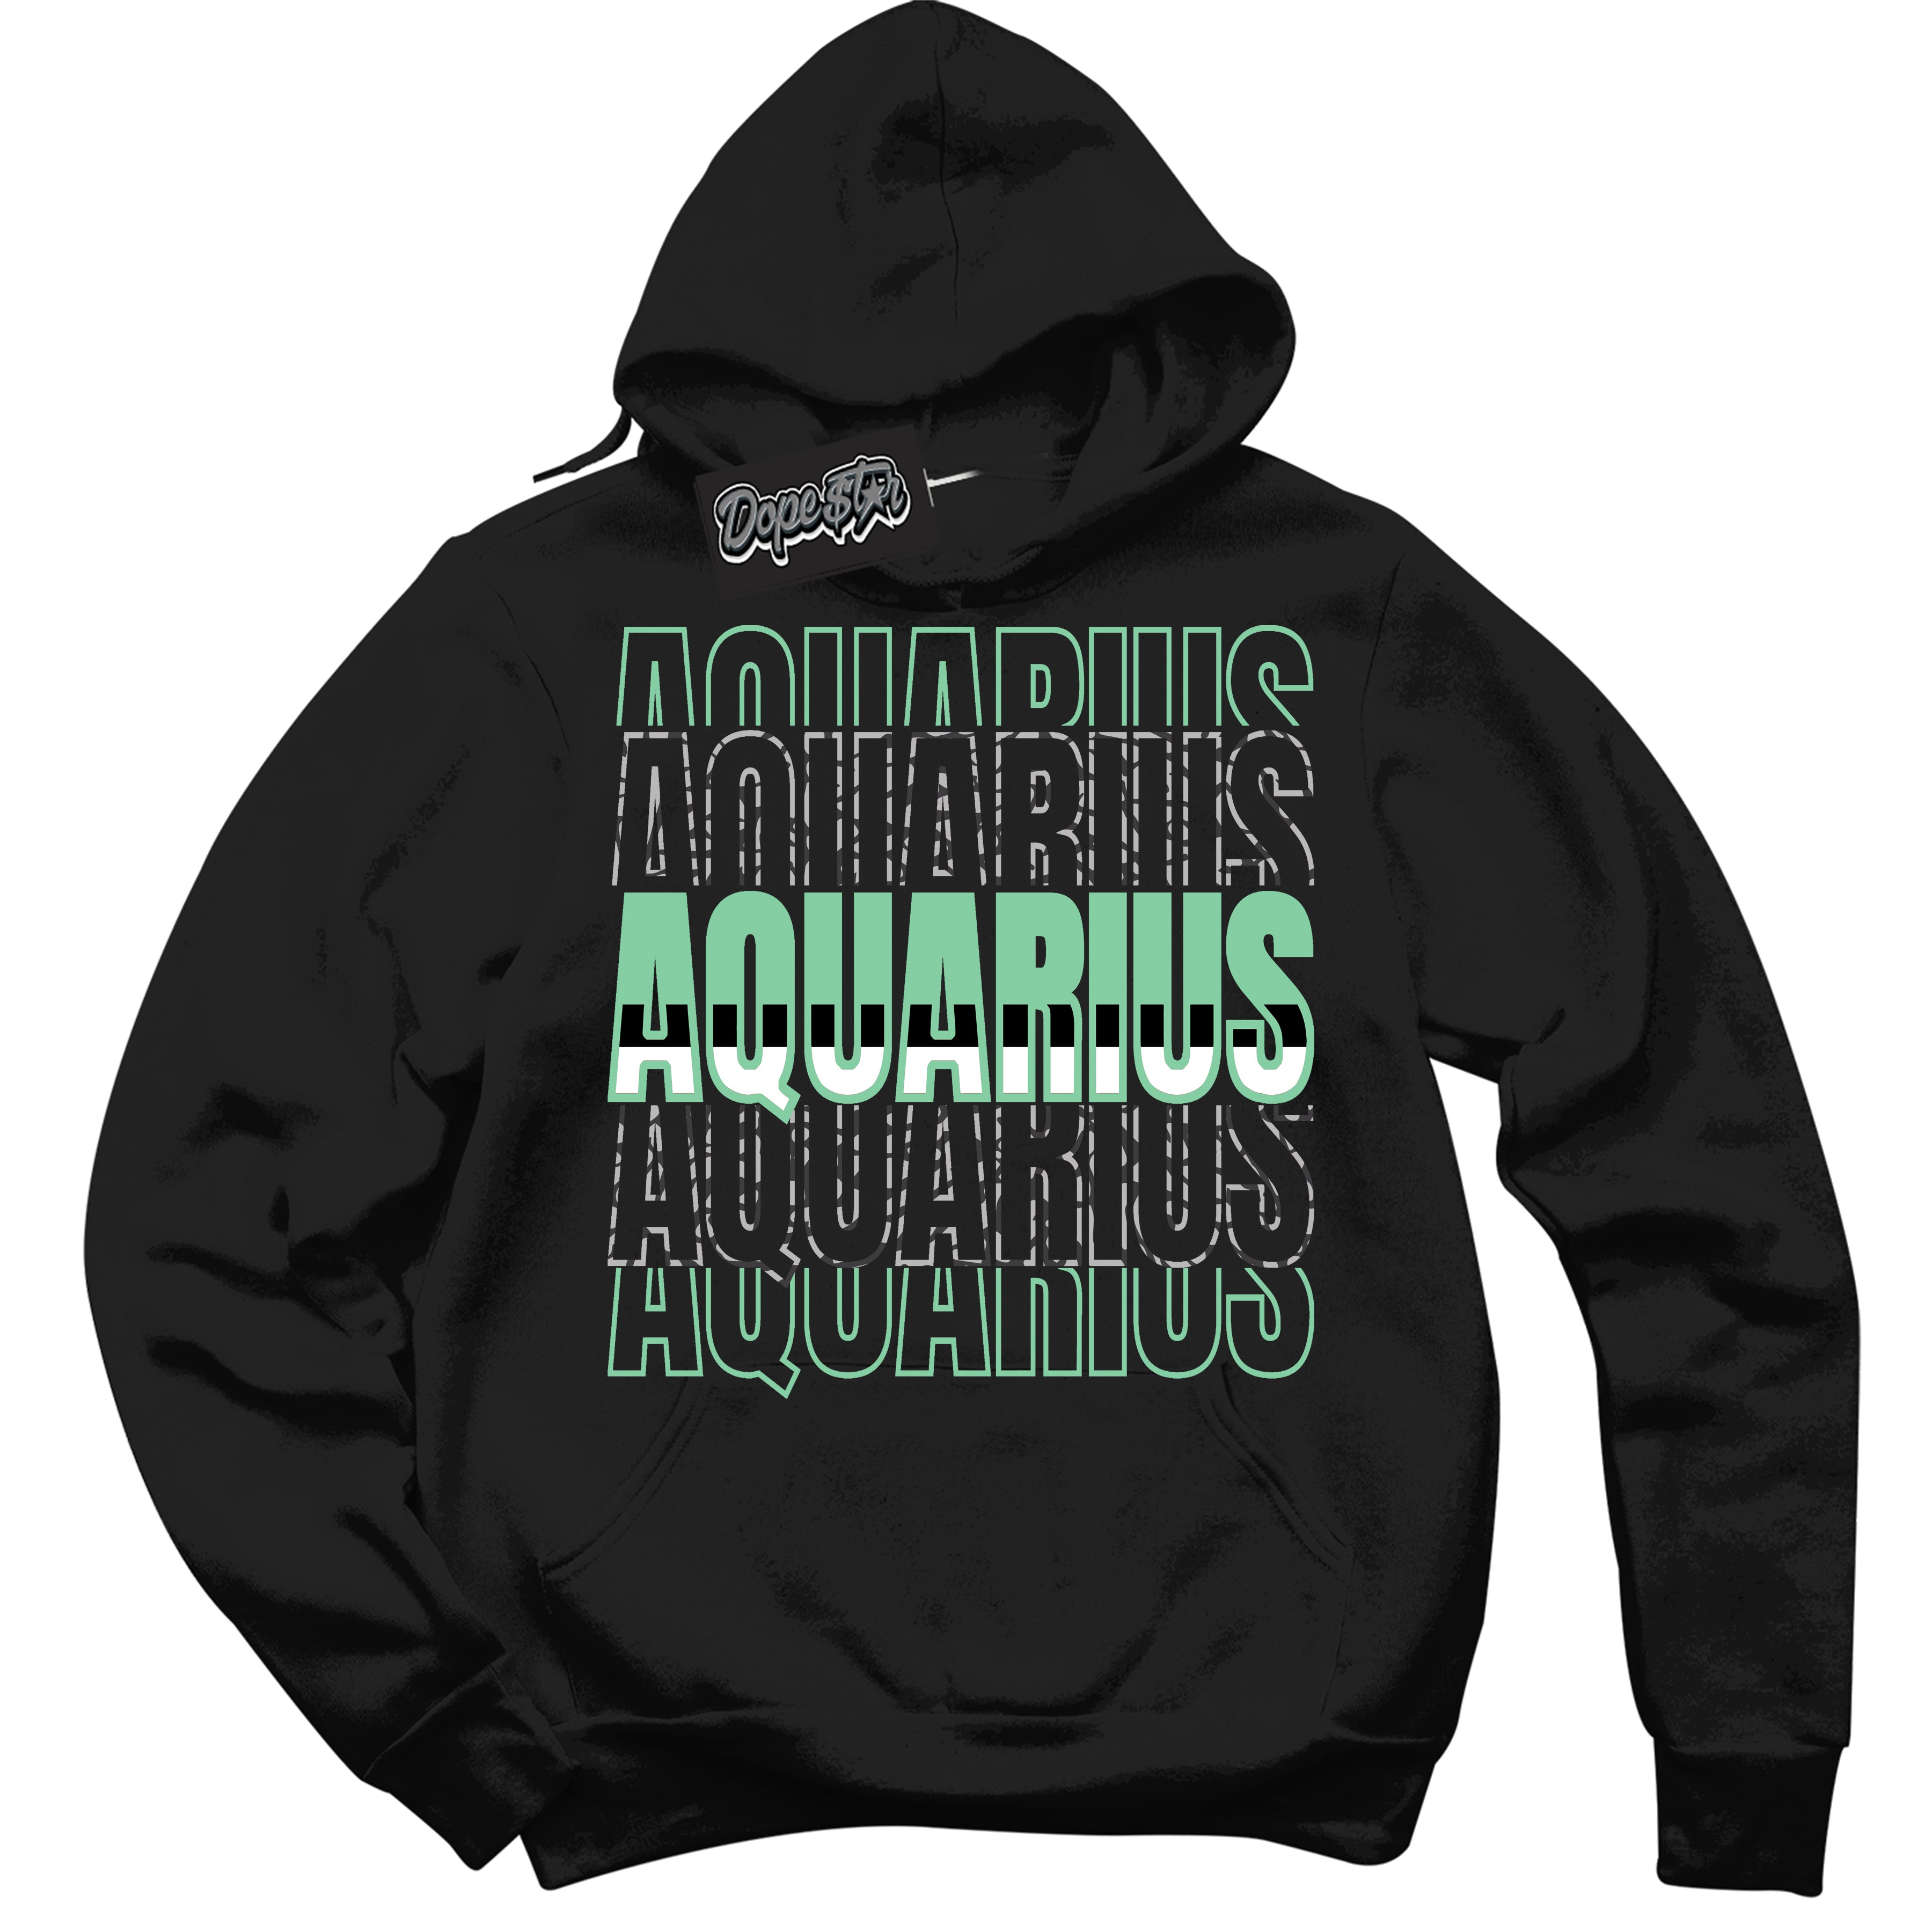 Cool Black Graphic DopeStar Hoodie with “ Aquarius “ print, that perfectly matches Green Glow 3S sneakers